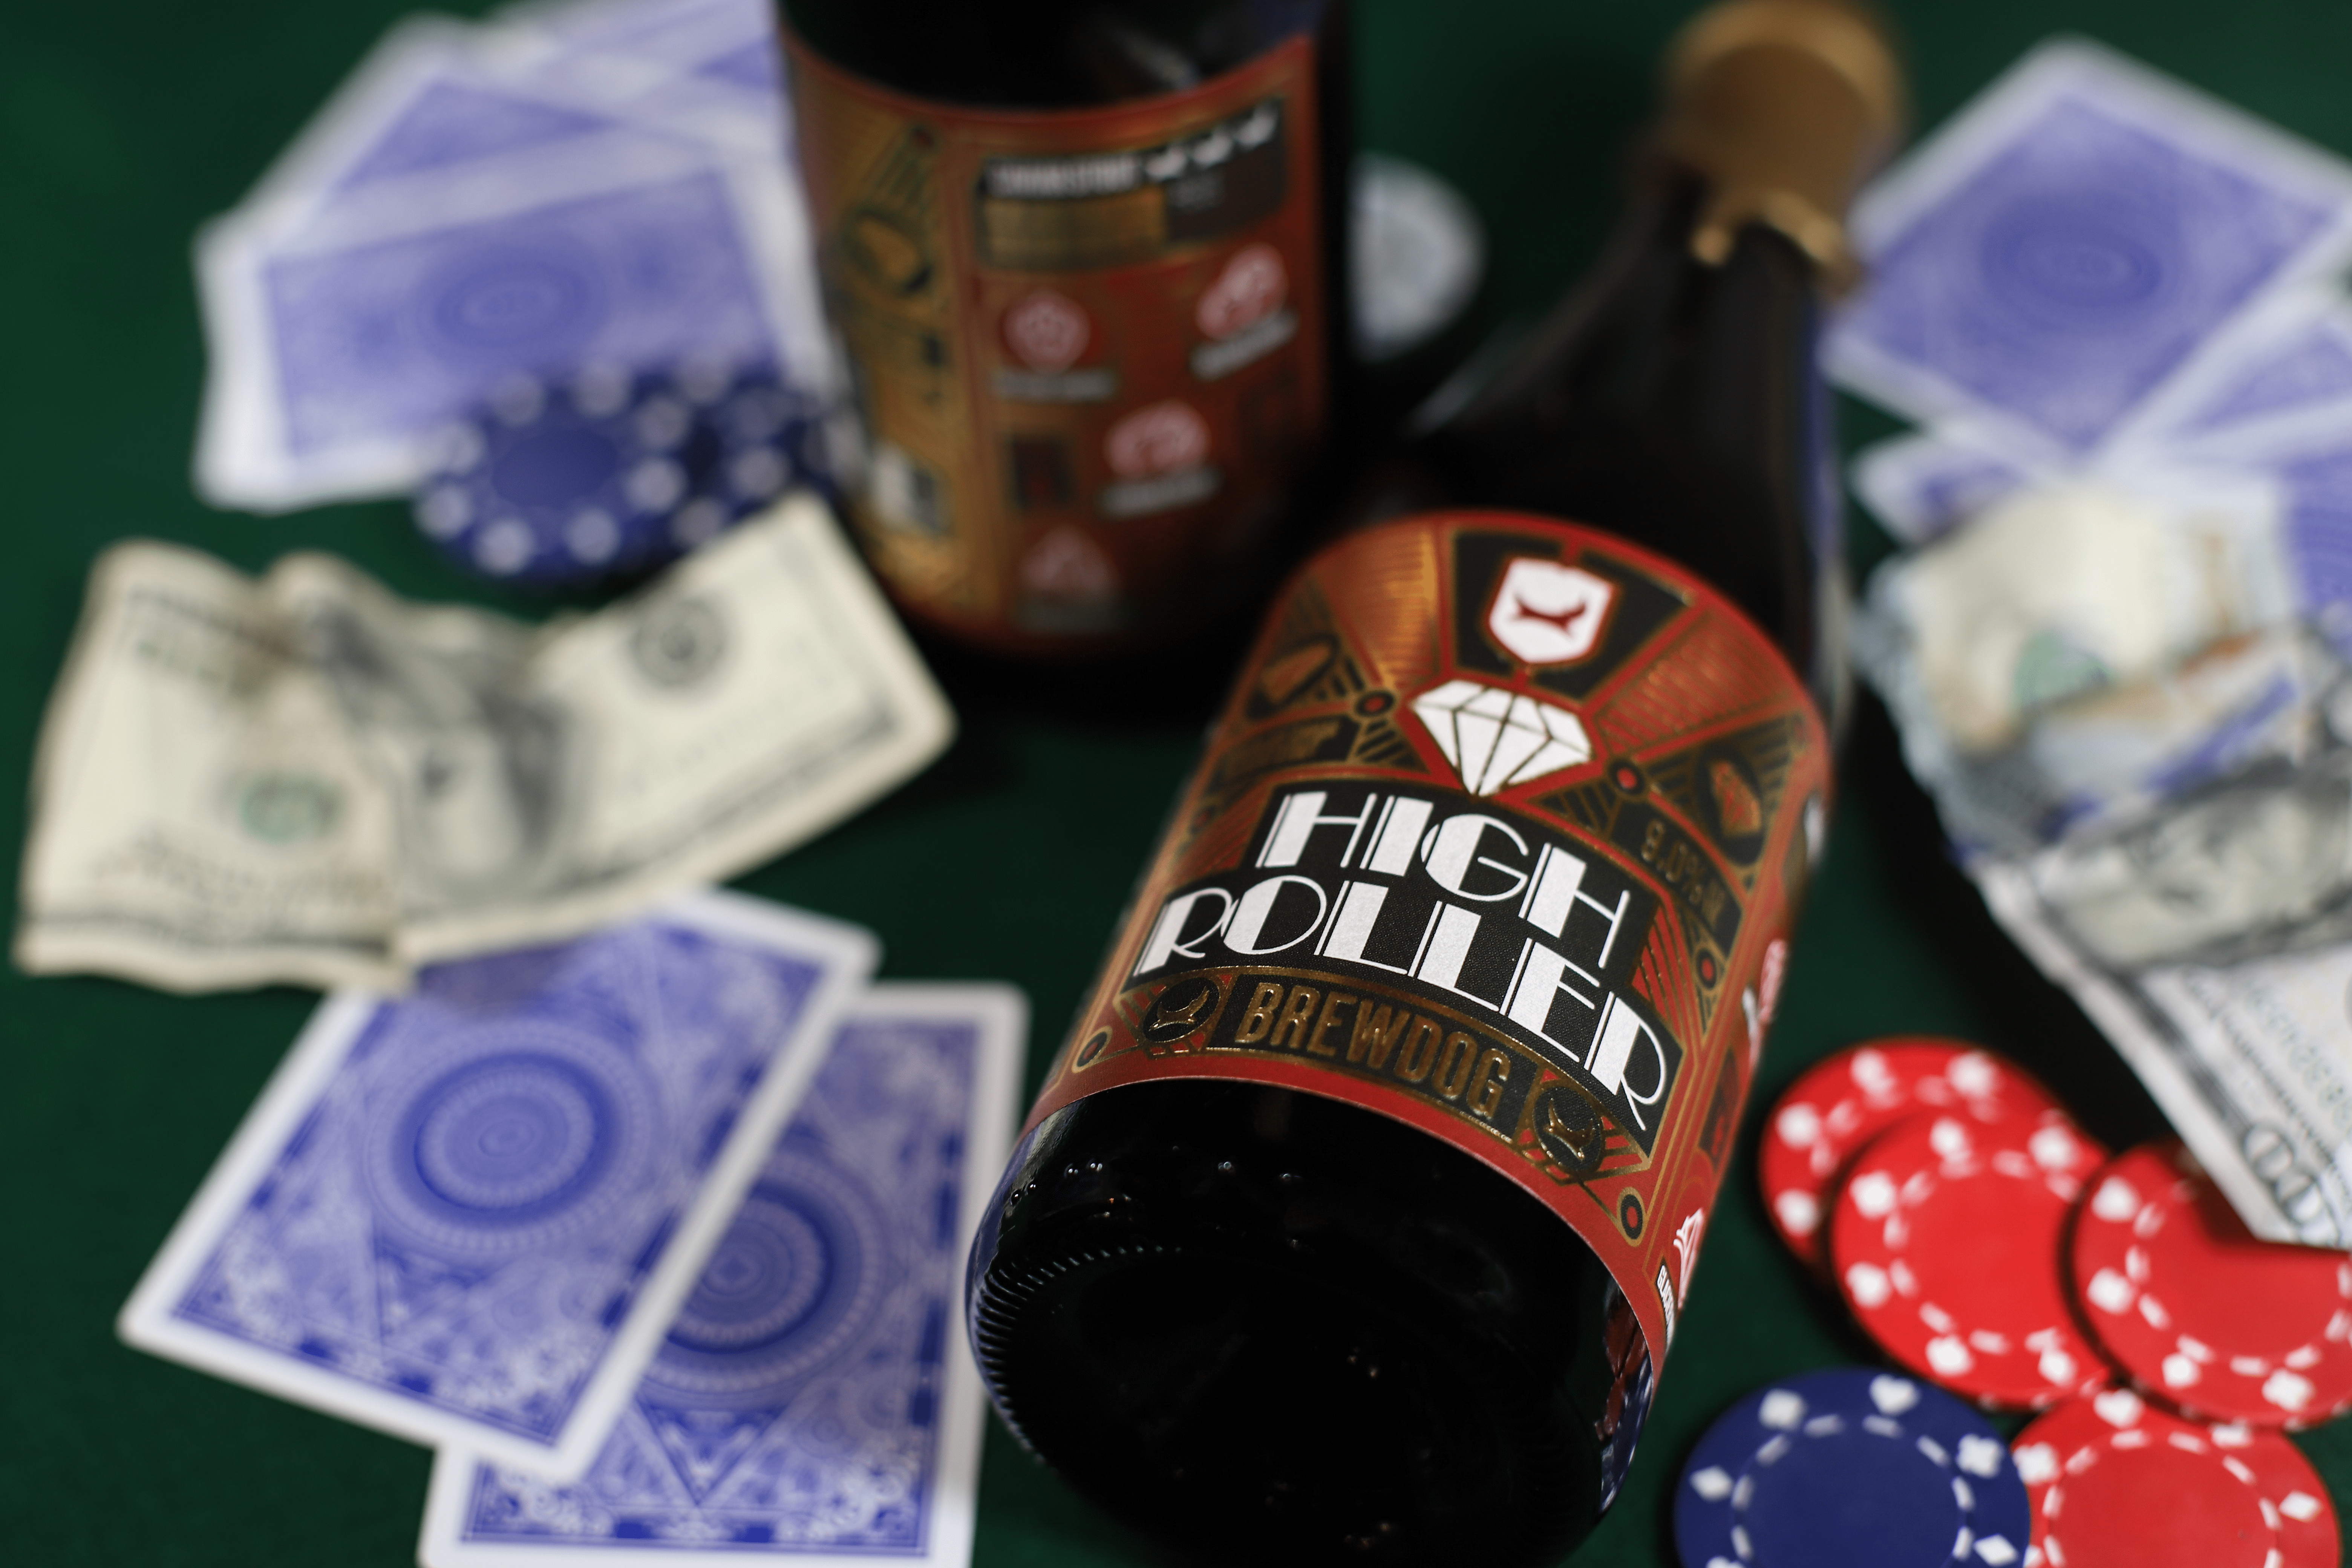 High-Roller beer bottle lying on poker table with cards and chips